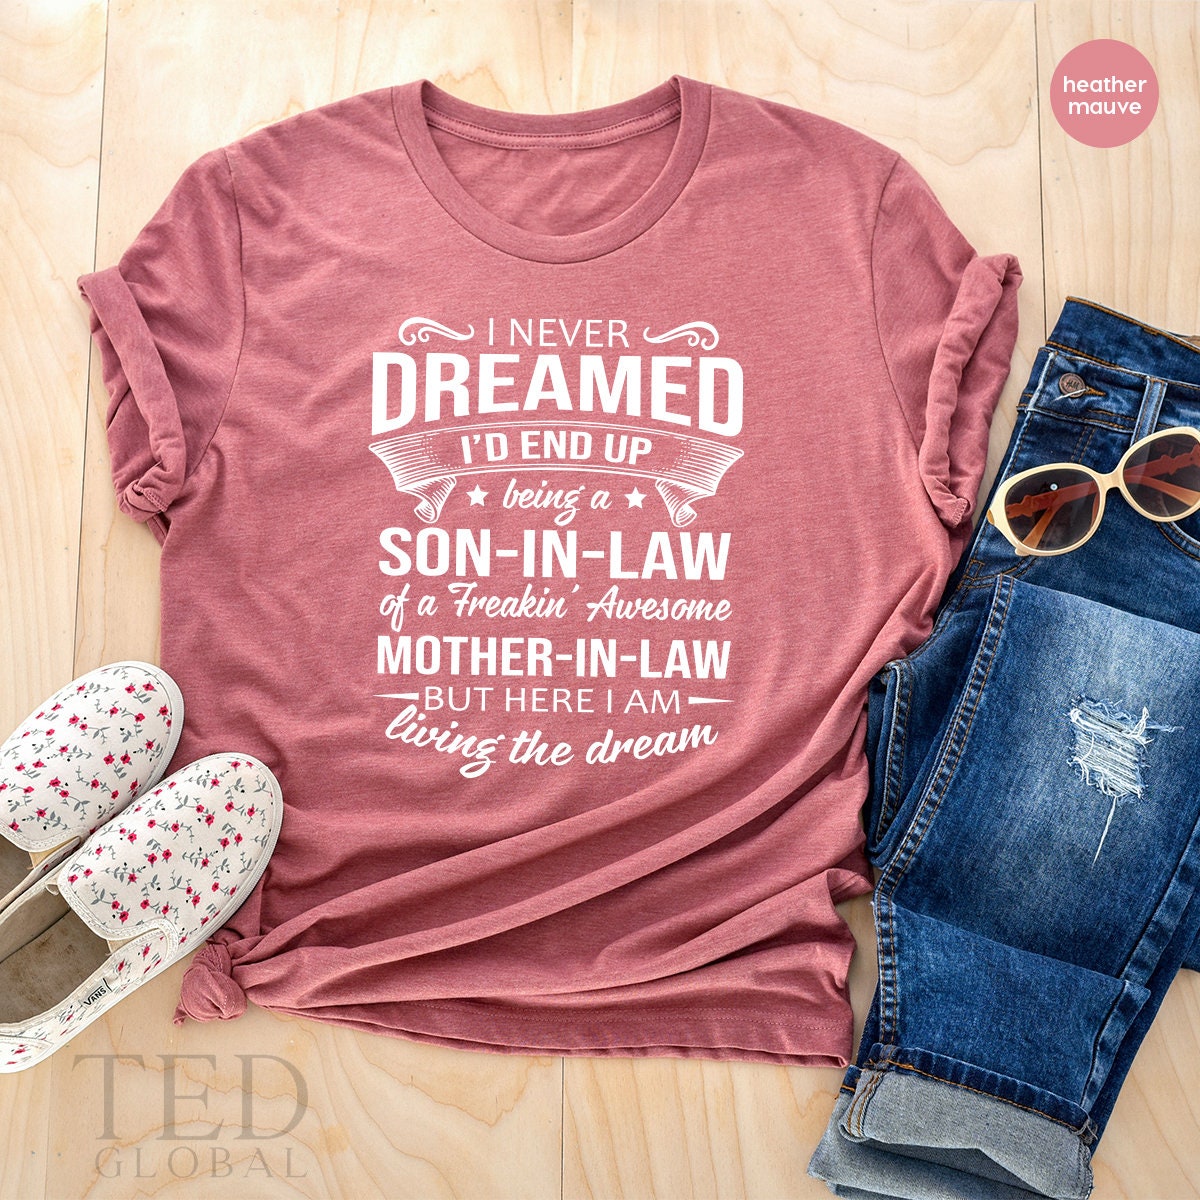 Son In Law Shirt,I Never Dreamed Shirt, Son-In-Law Of A Freakin' Awesome Mother-In Law Shirt,I Am Living The Dream Shirt,Mother-In Law Shirt - Fastdeliverytees.com